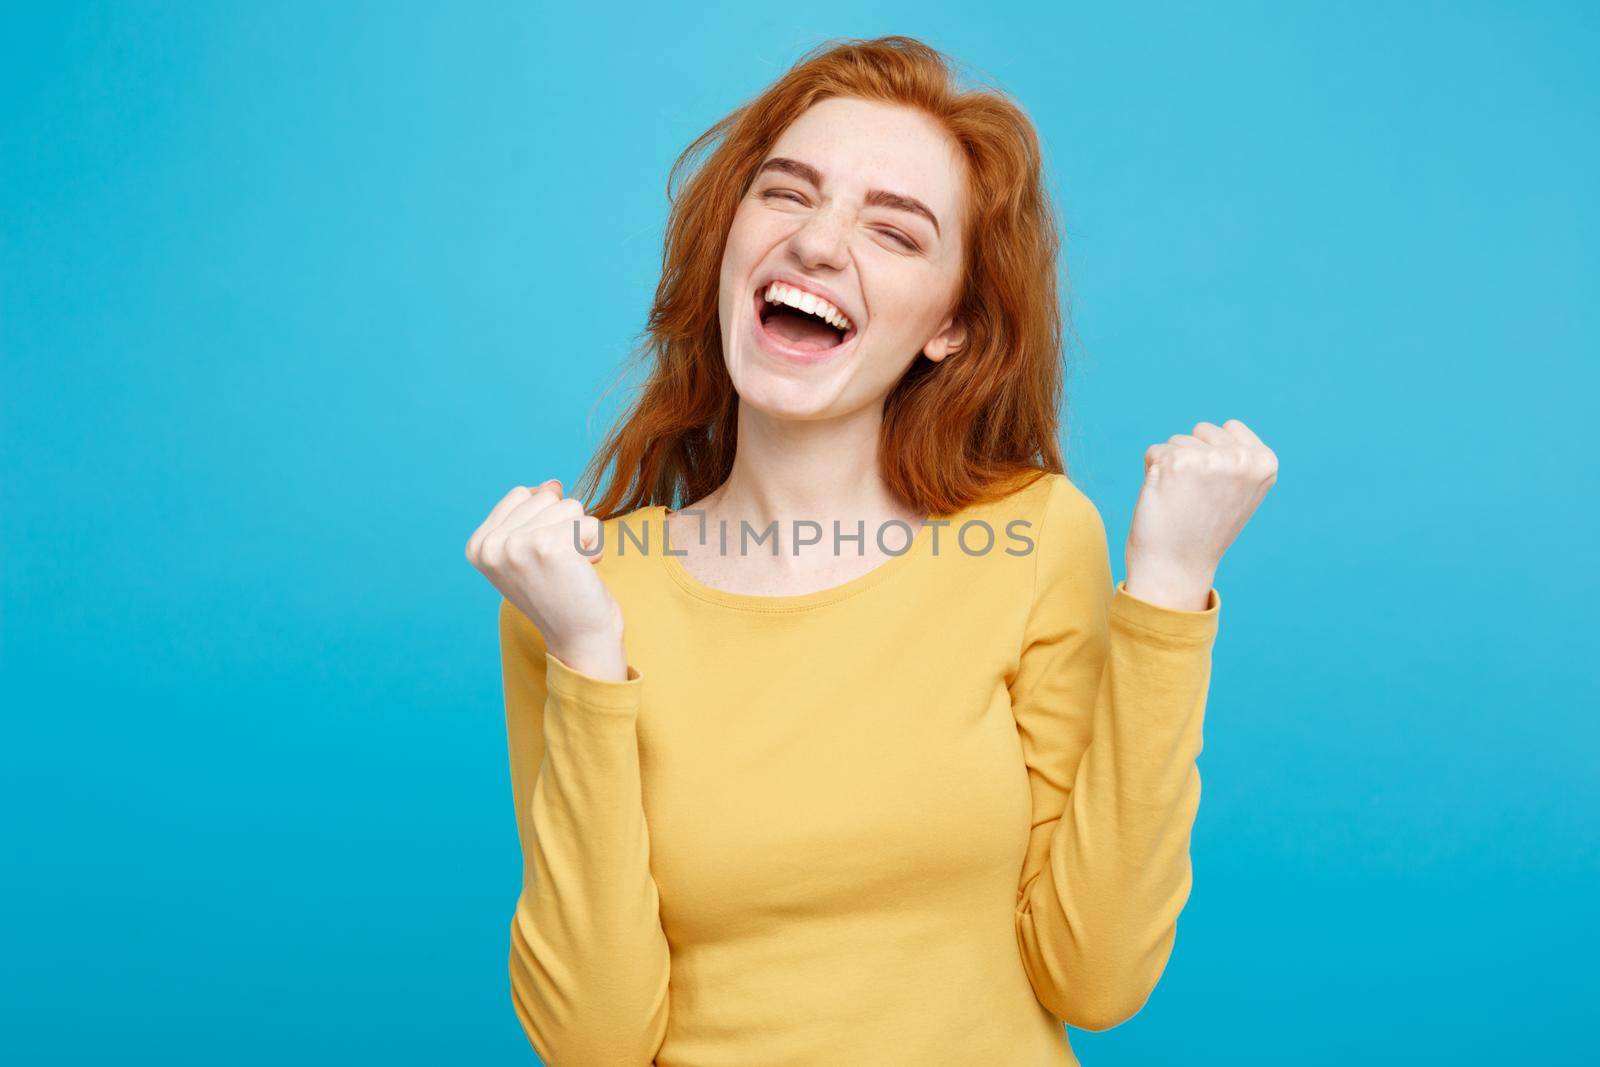 Lifestyle concept - Portrait of cheerful happy ginger red hair girl with joyful and exciting smiling to camera. Isolated on Blue Pastel Background. Copy space.